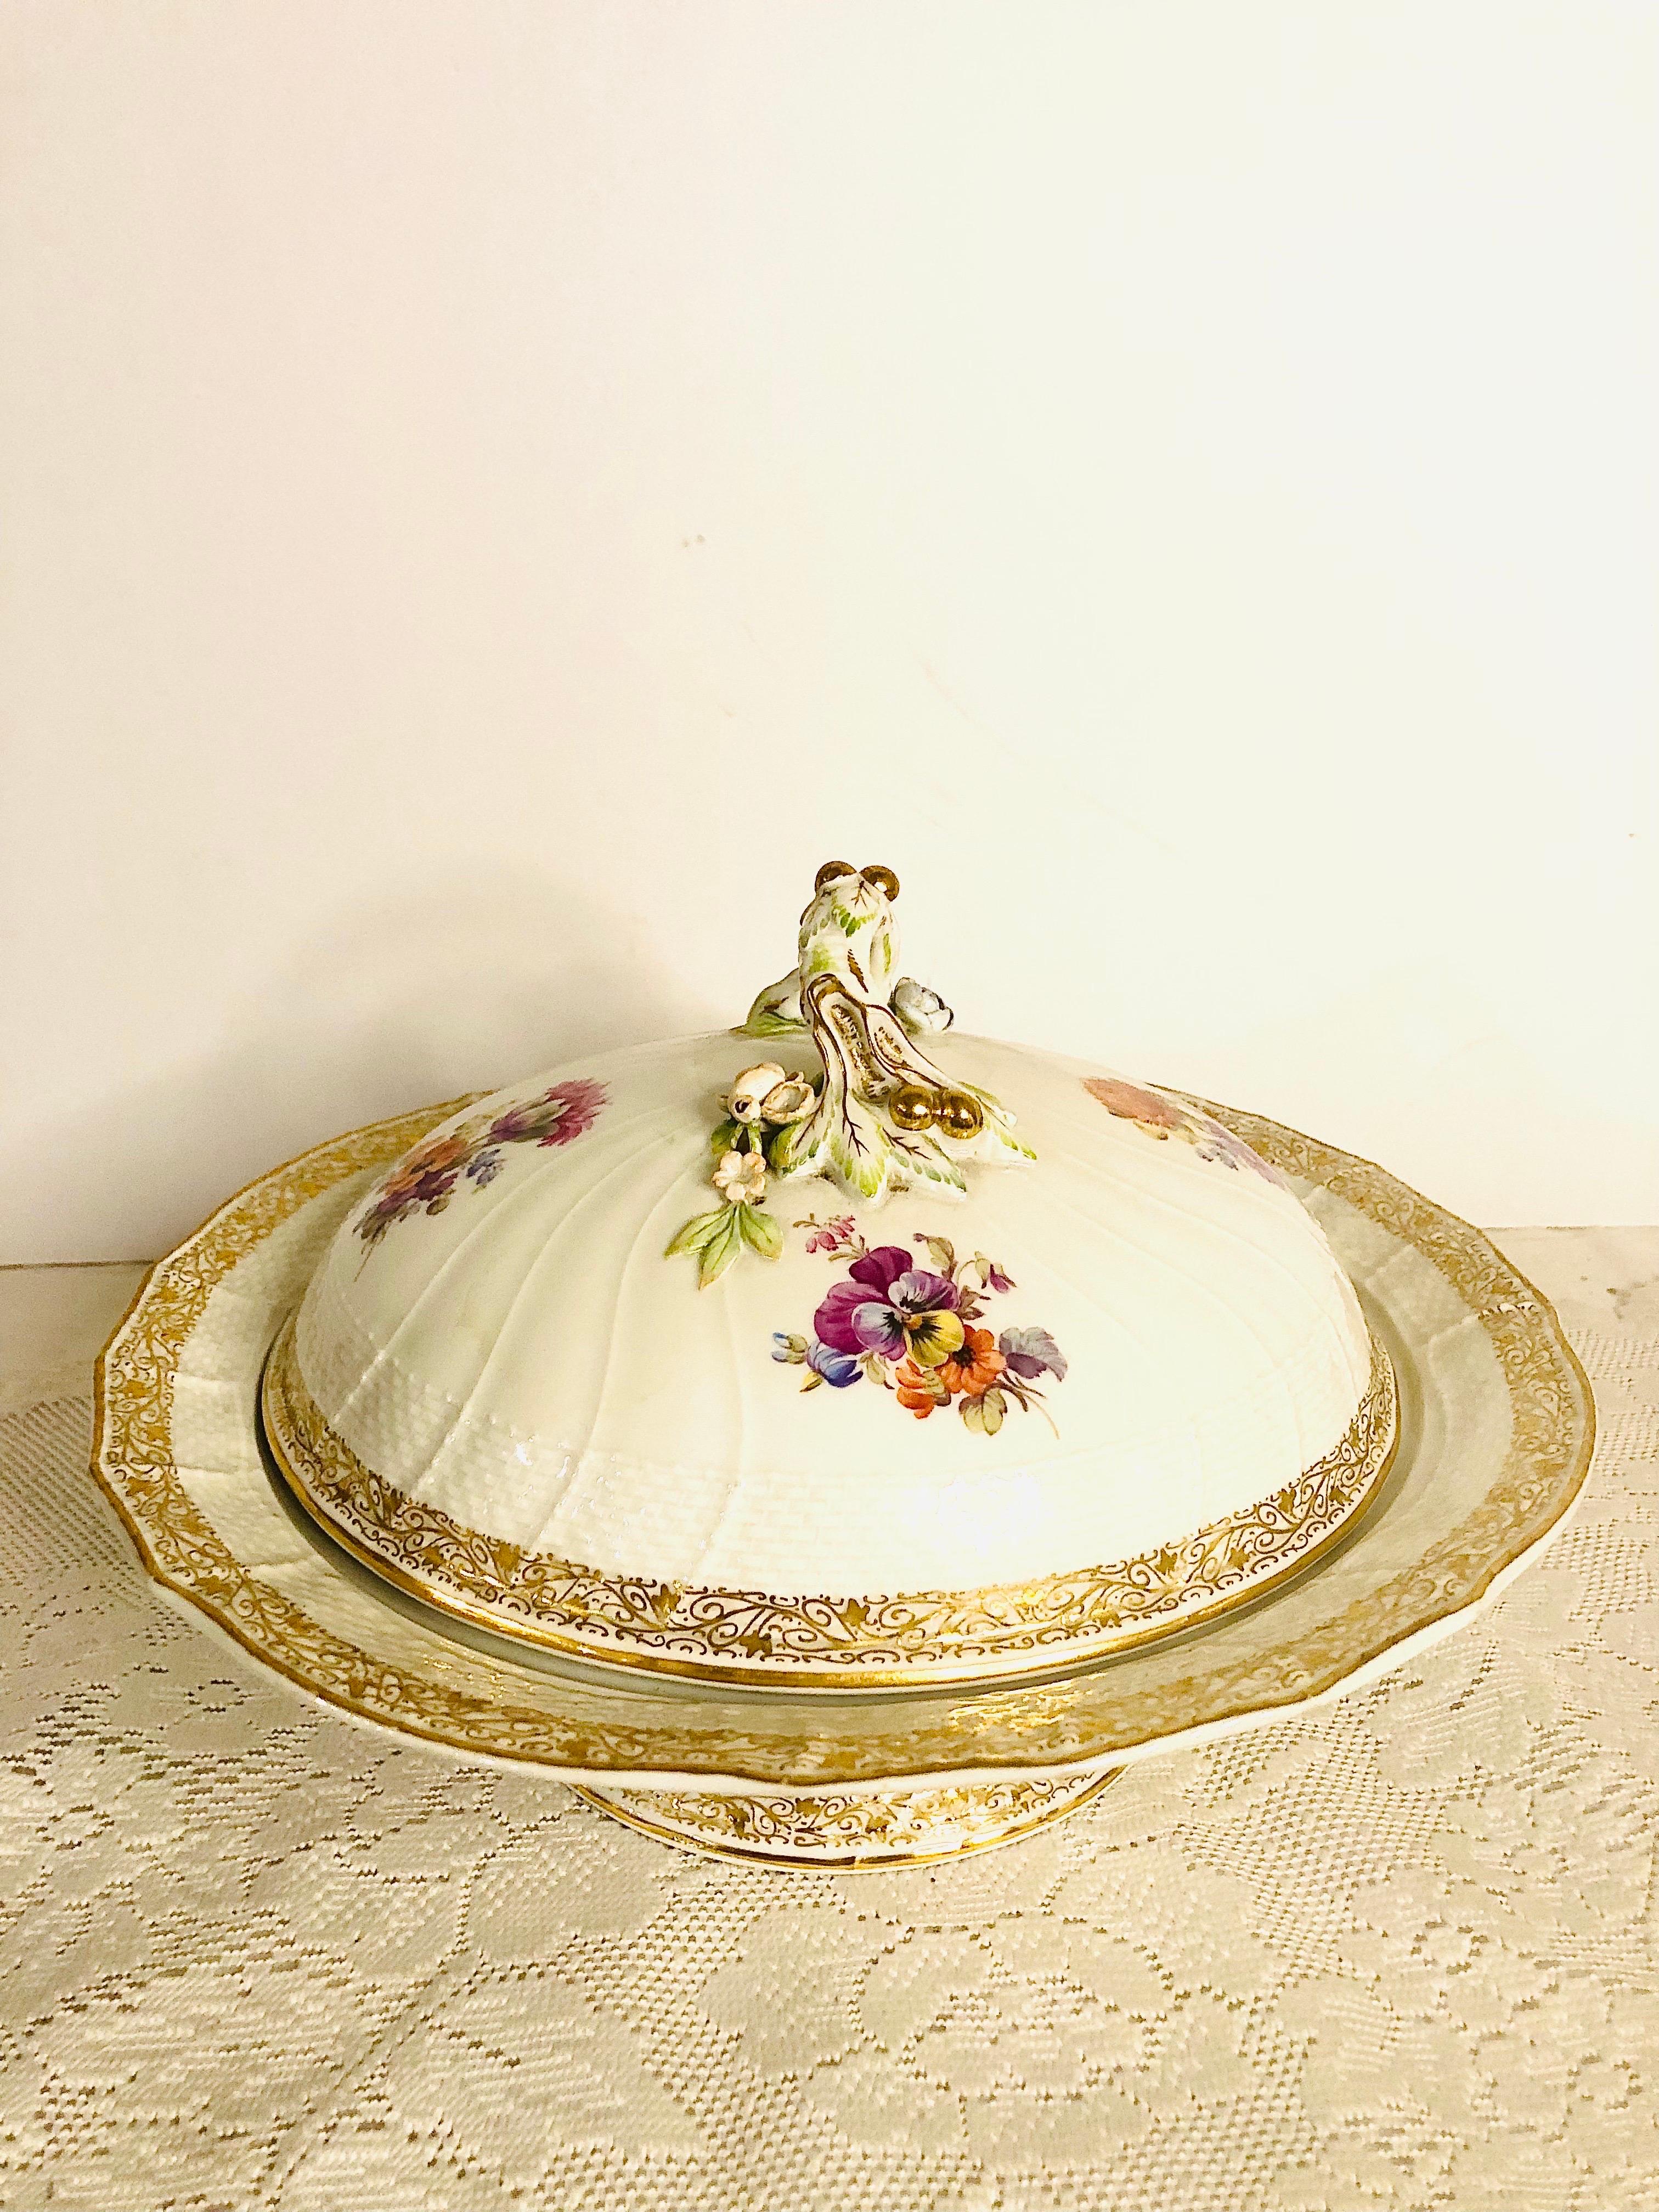 This is a very beautiful KPM covered bowl on a pedestal. The cover has four gorgeous hand-painted bouquets of flowers. The handle of the cover is decorated with raised gold cherries or fruit as well as raised roses in pink and blue with raised